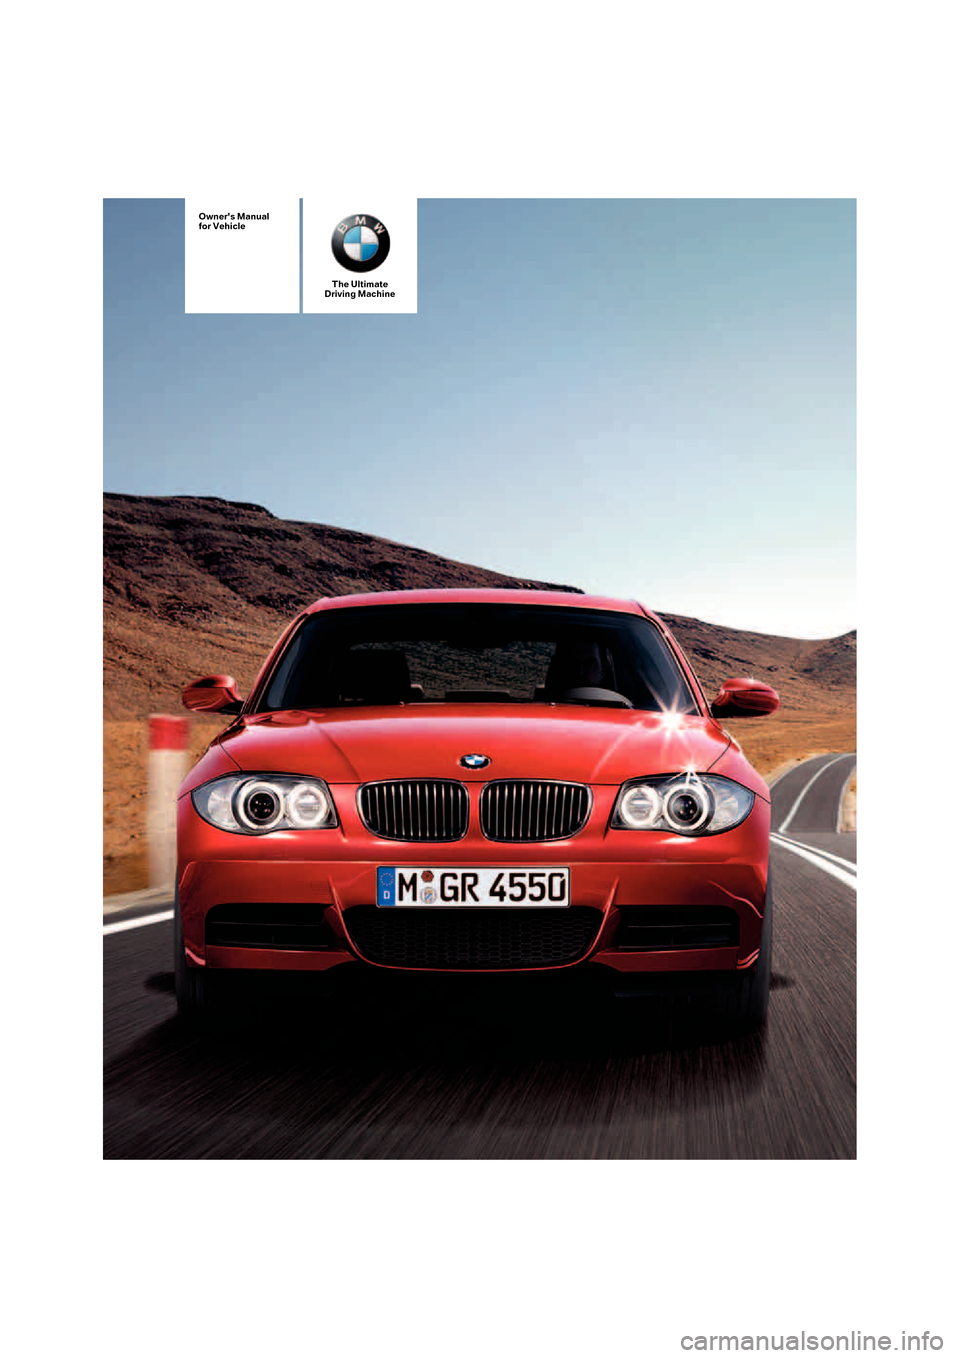 BMW 135I COUPE 2008 E82 Owners Manual The Ultimate
Driving Machine
Owners Manual
for Vehicle 